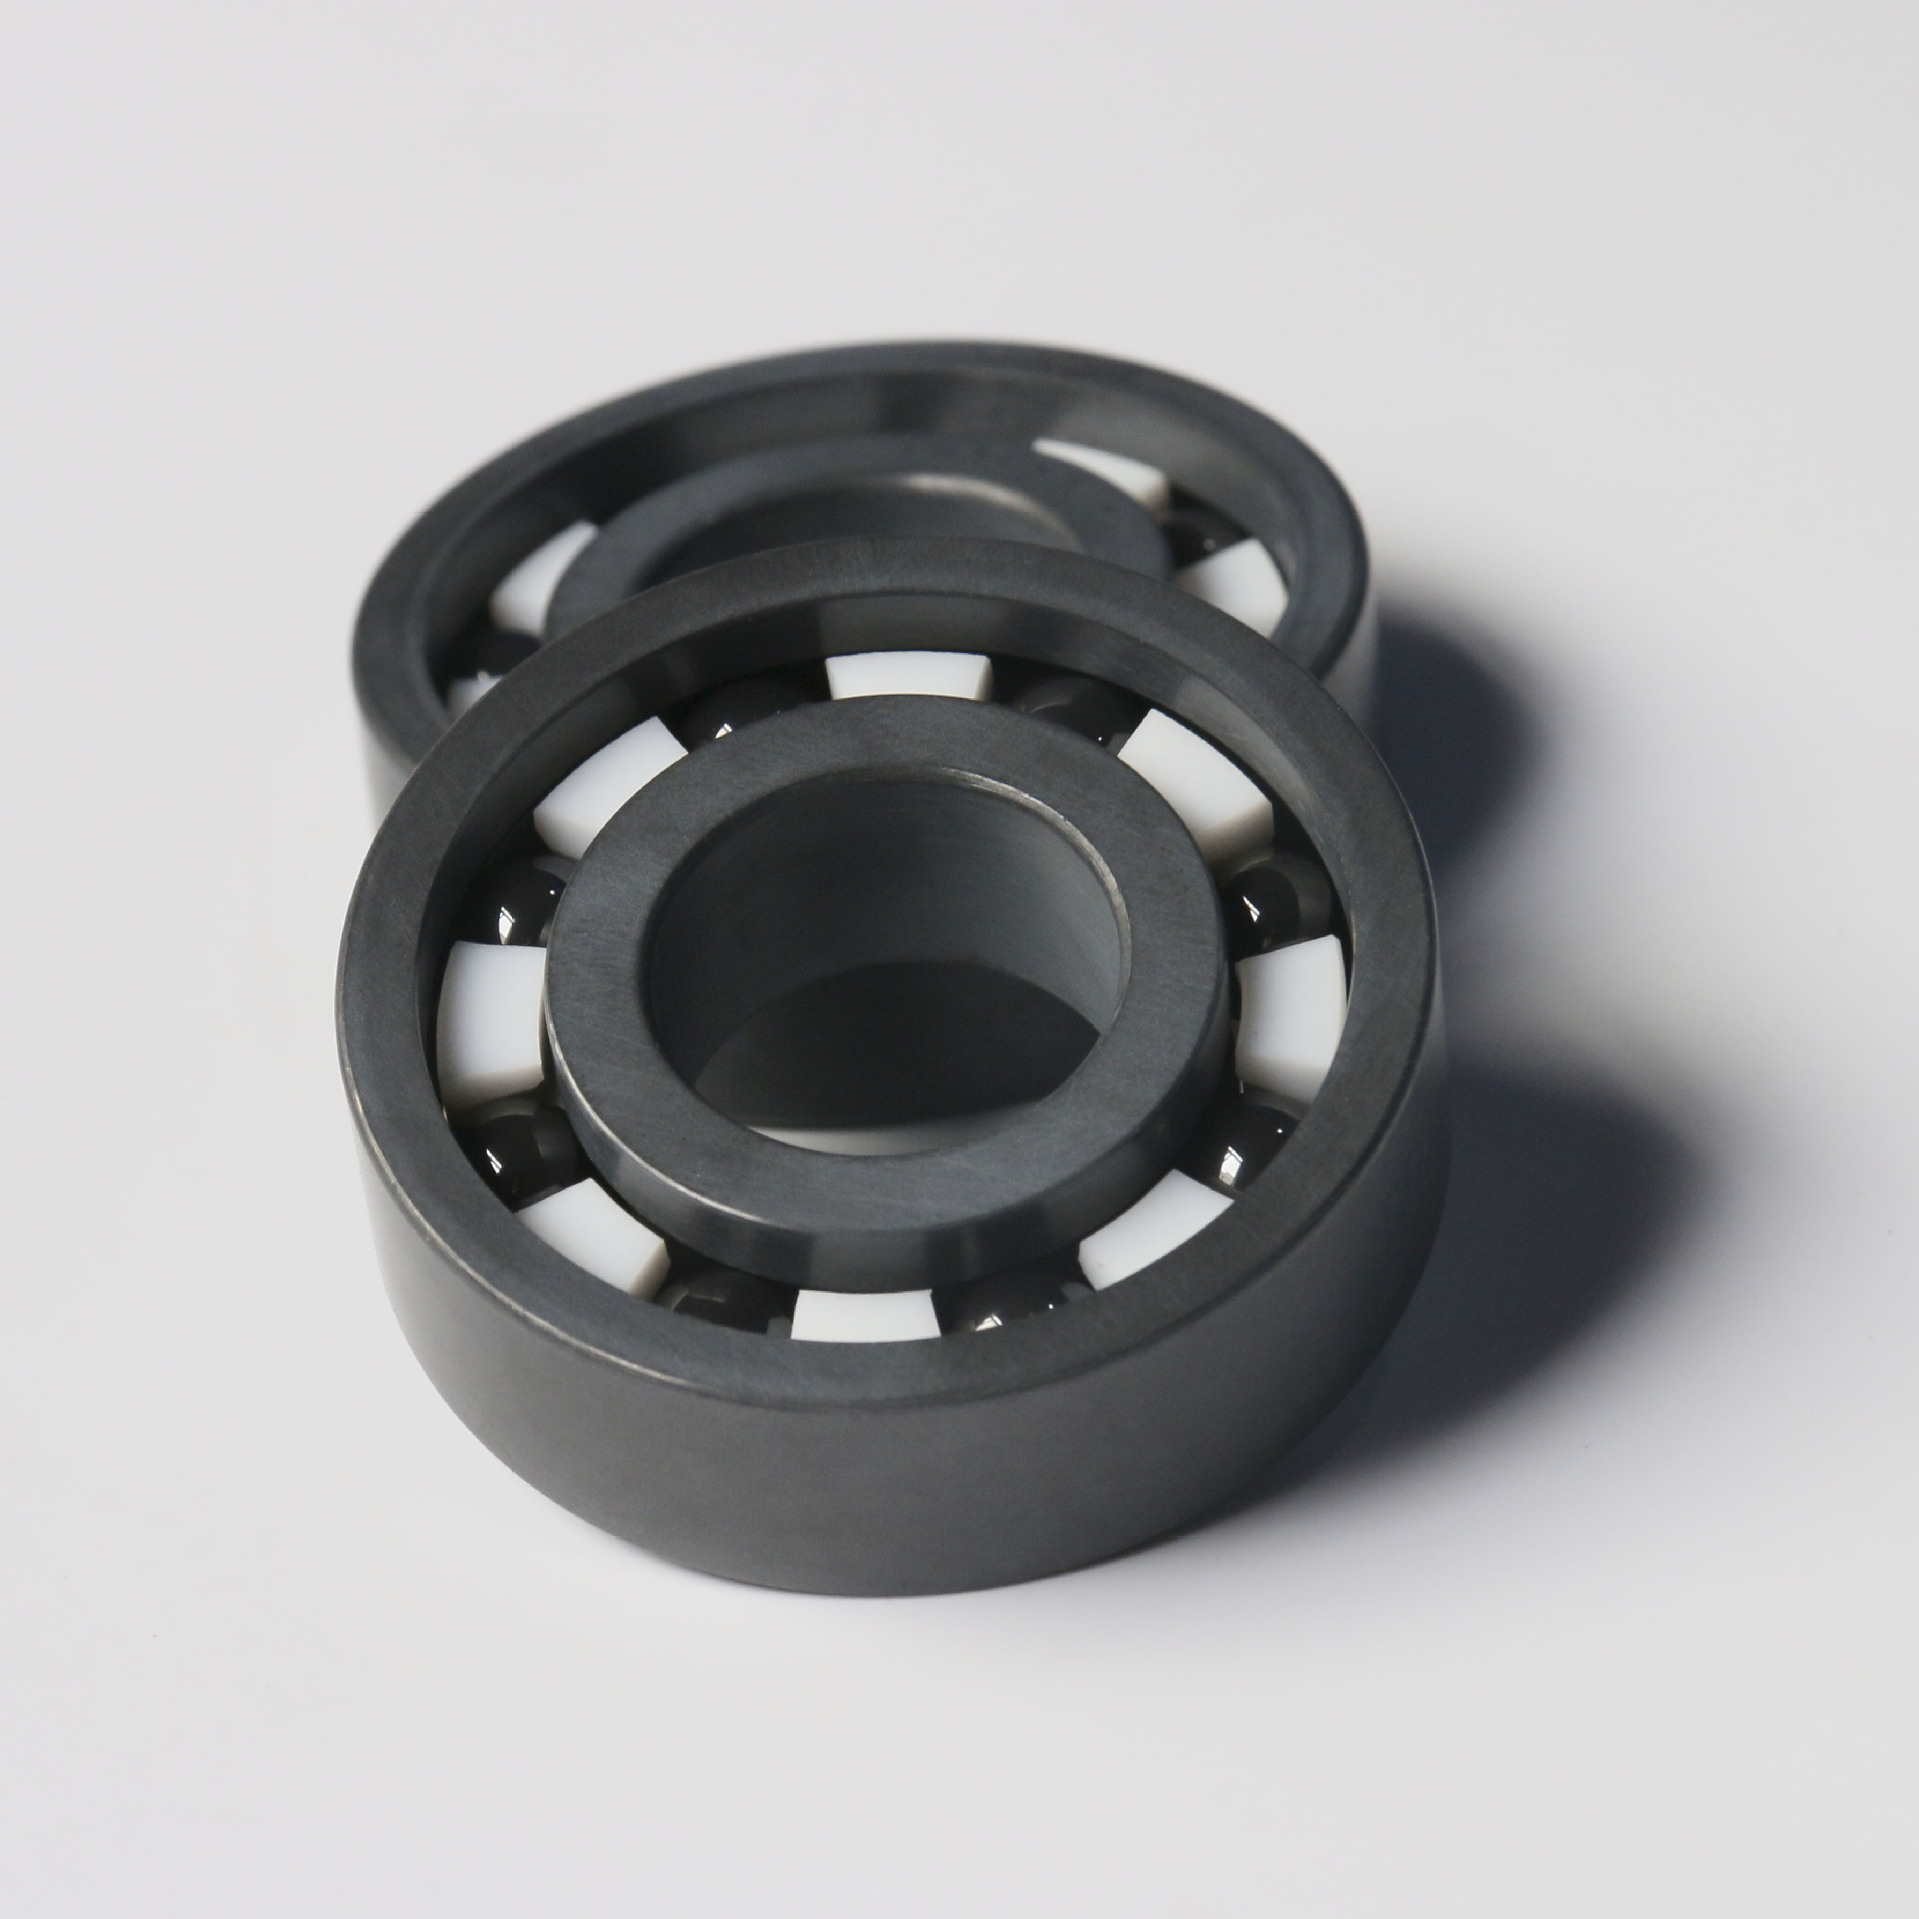 Wear-resistant silicon nitride ceramic bearings